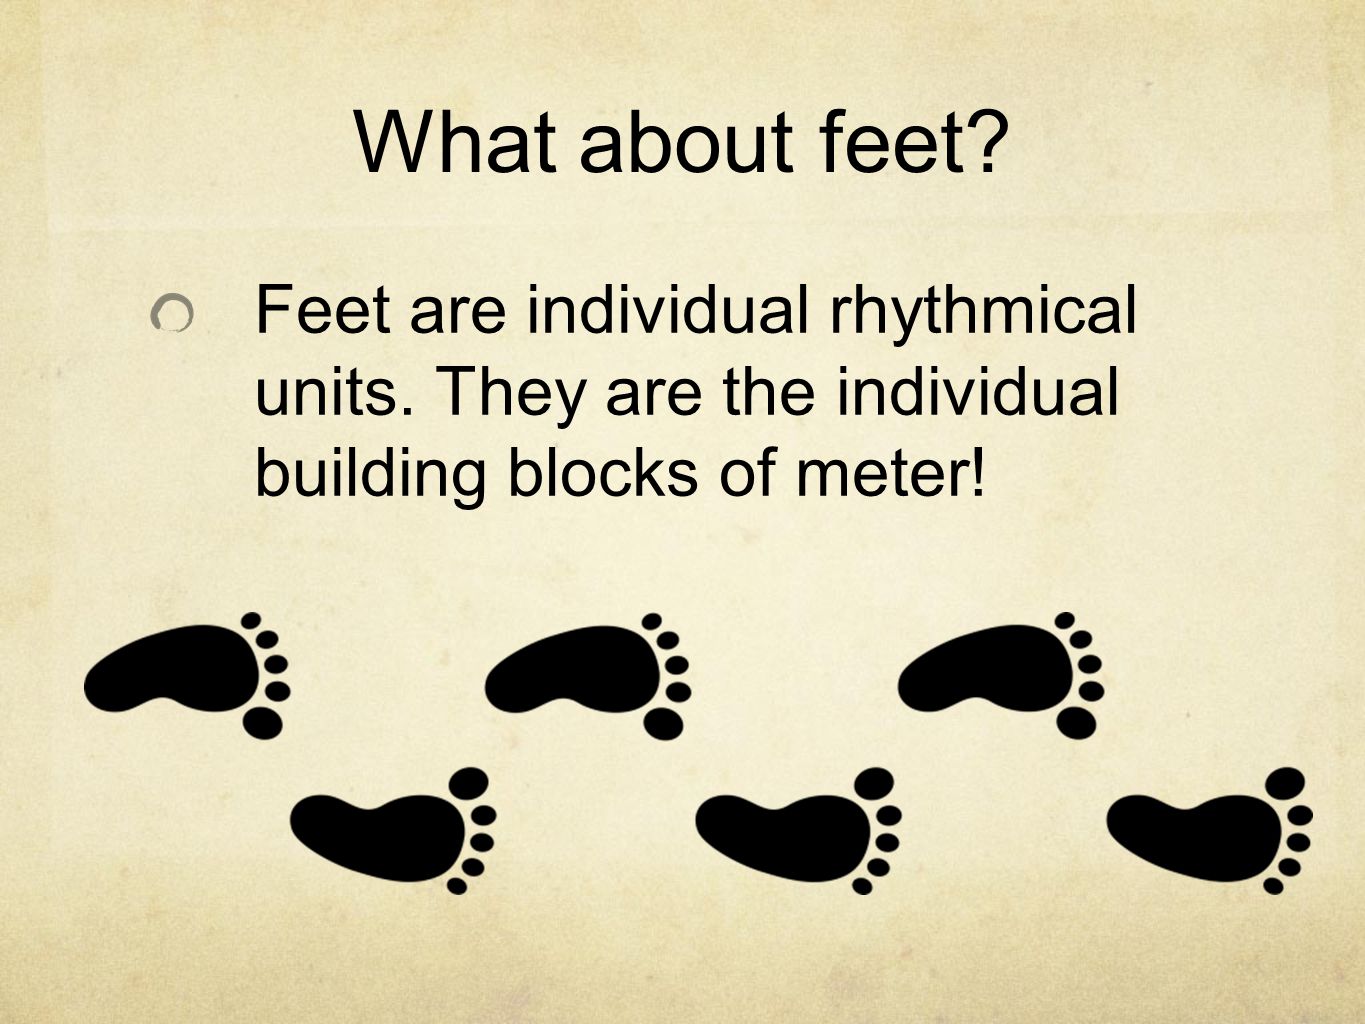 What about feet. Feet are individual rhythmical units.